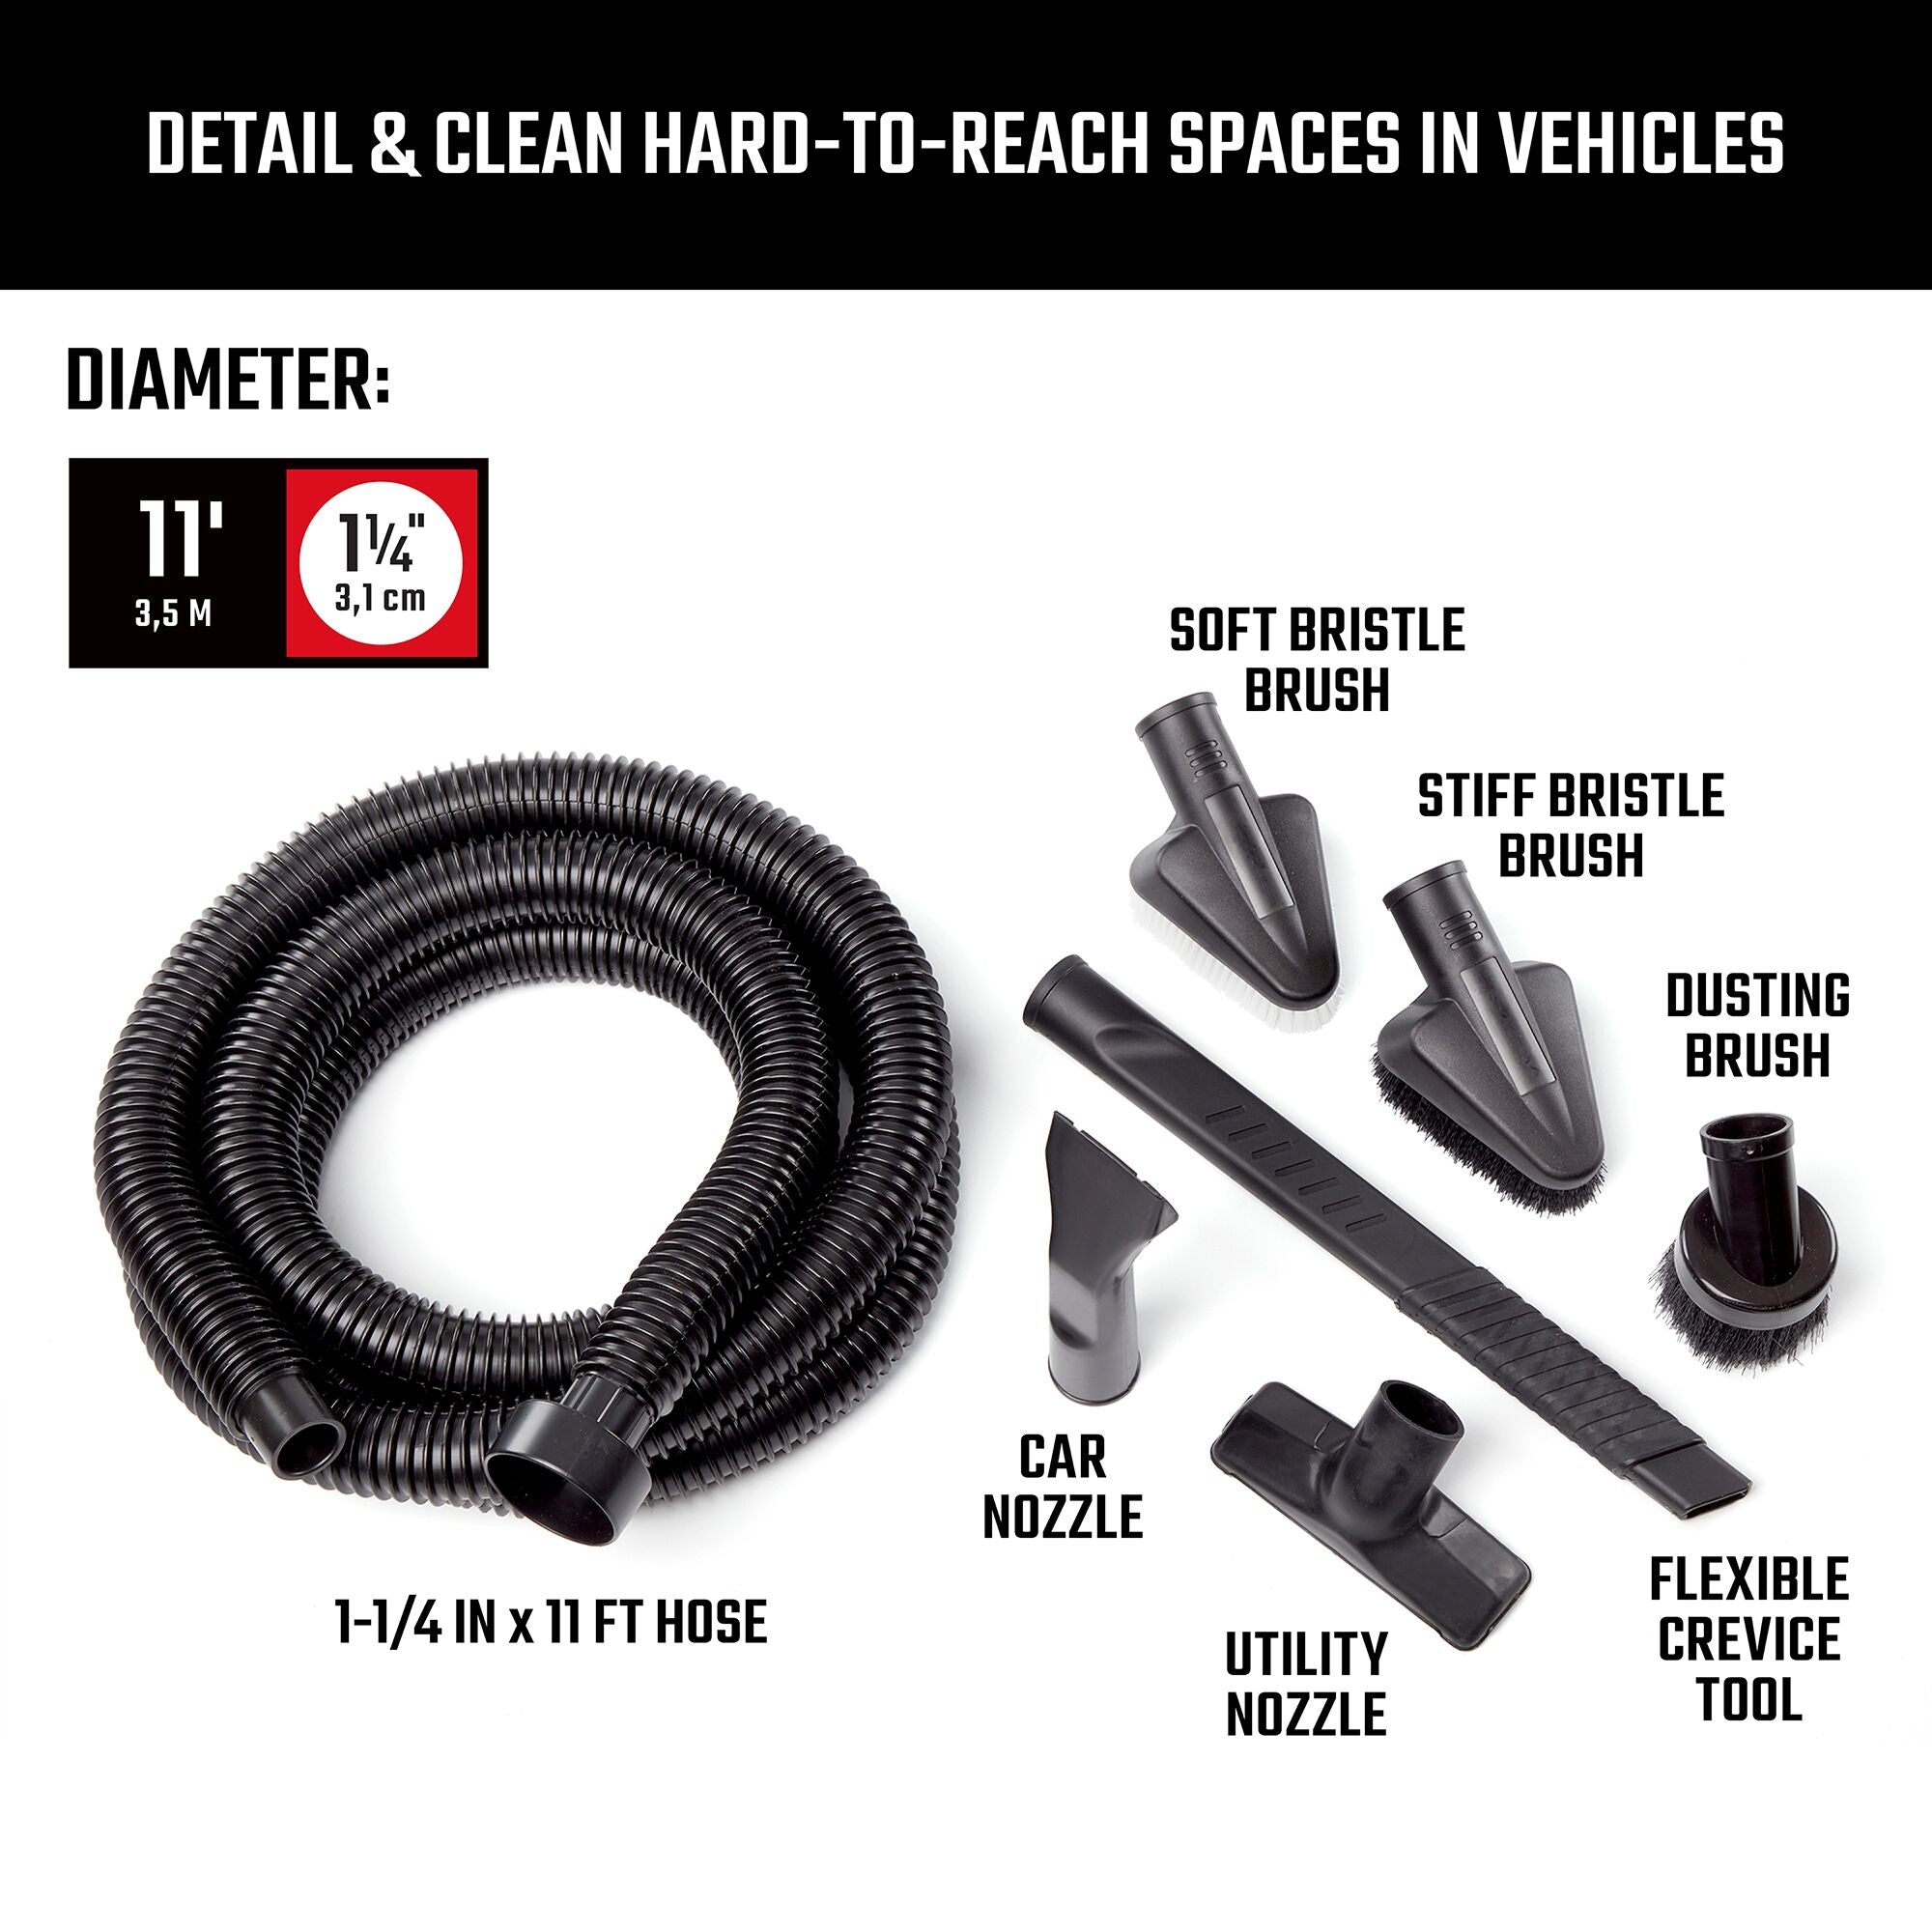 ALL PARTS ETC. Vacuum Attachments Car Detailing Kit with Dryer Lint  Cleaner, Dryer Vent Brush and 24 Flexible Crevice Tool for Shop Vac & more  1.25”